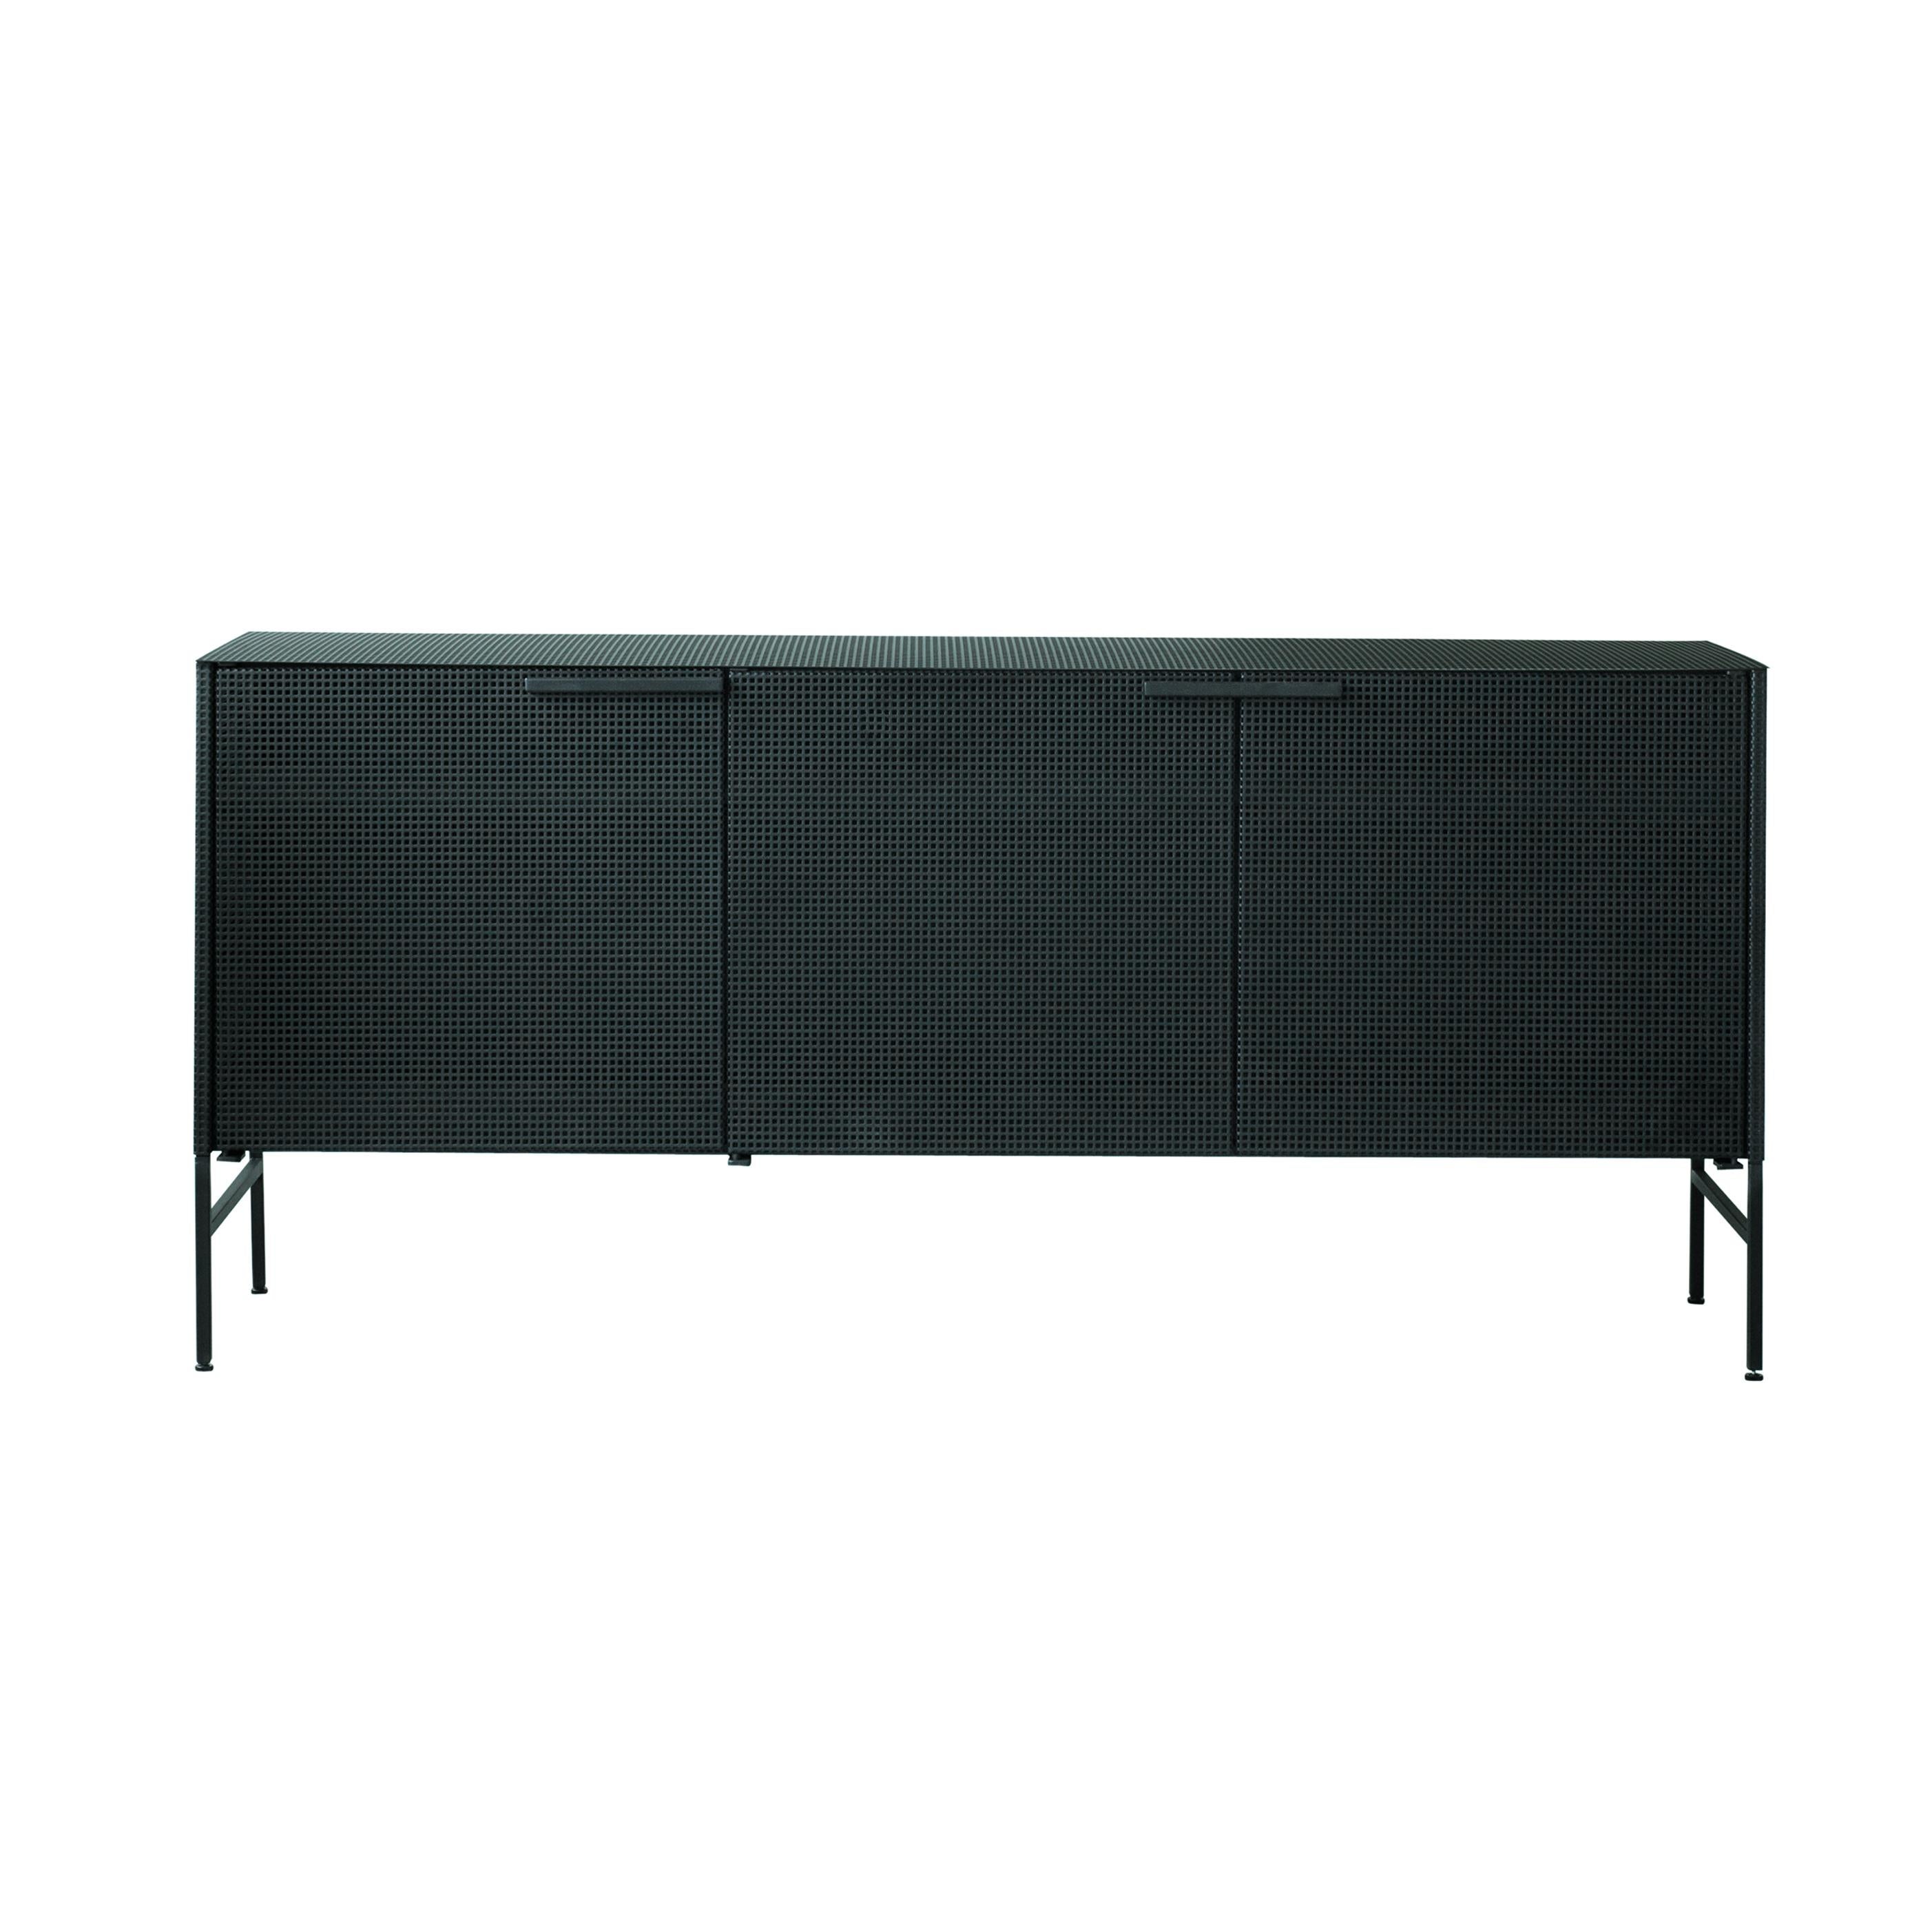 Black grid sideboard by Kristina Dam Studio
Materials: Black outdoor powder-coated steel
Dimensions: 160 x 72 x 36 cm


Kristina Dam graduated from The Royal Danish School of Fine Arts, Architecture and Design in Copenhagen. In her designs you